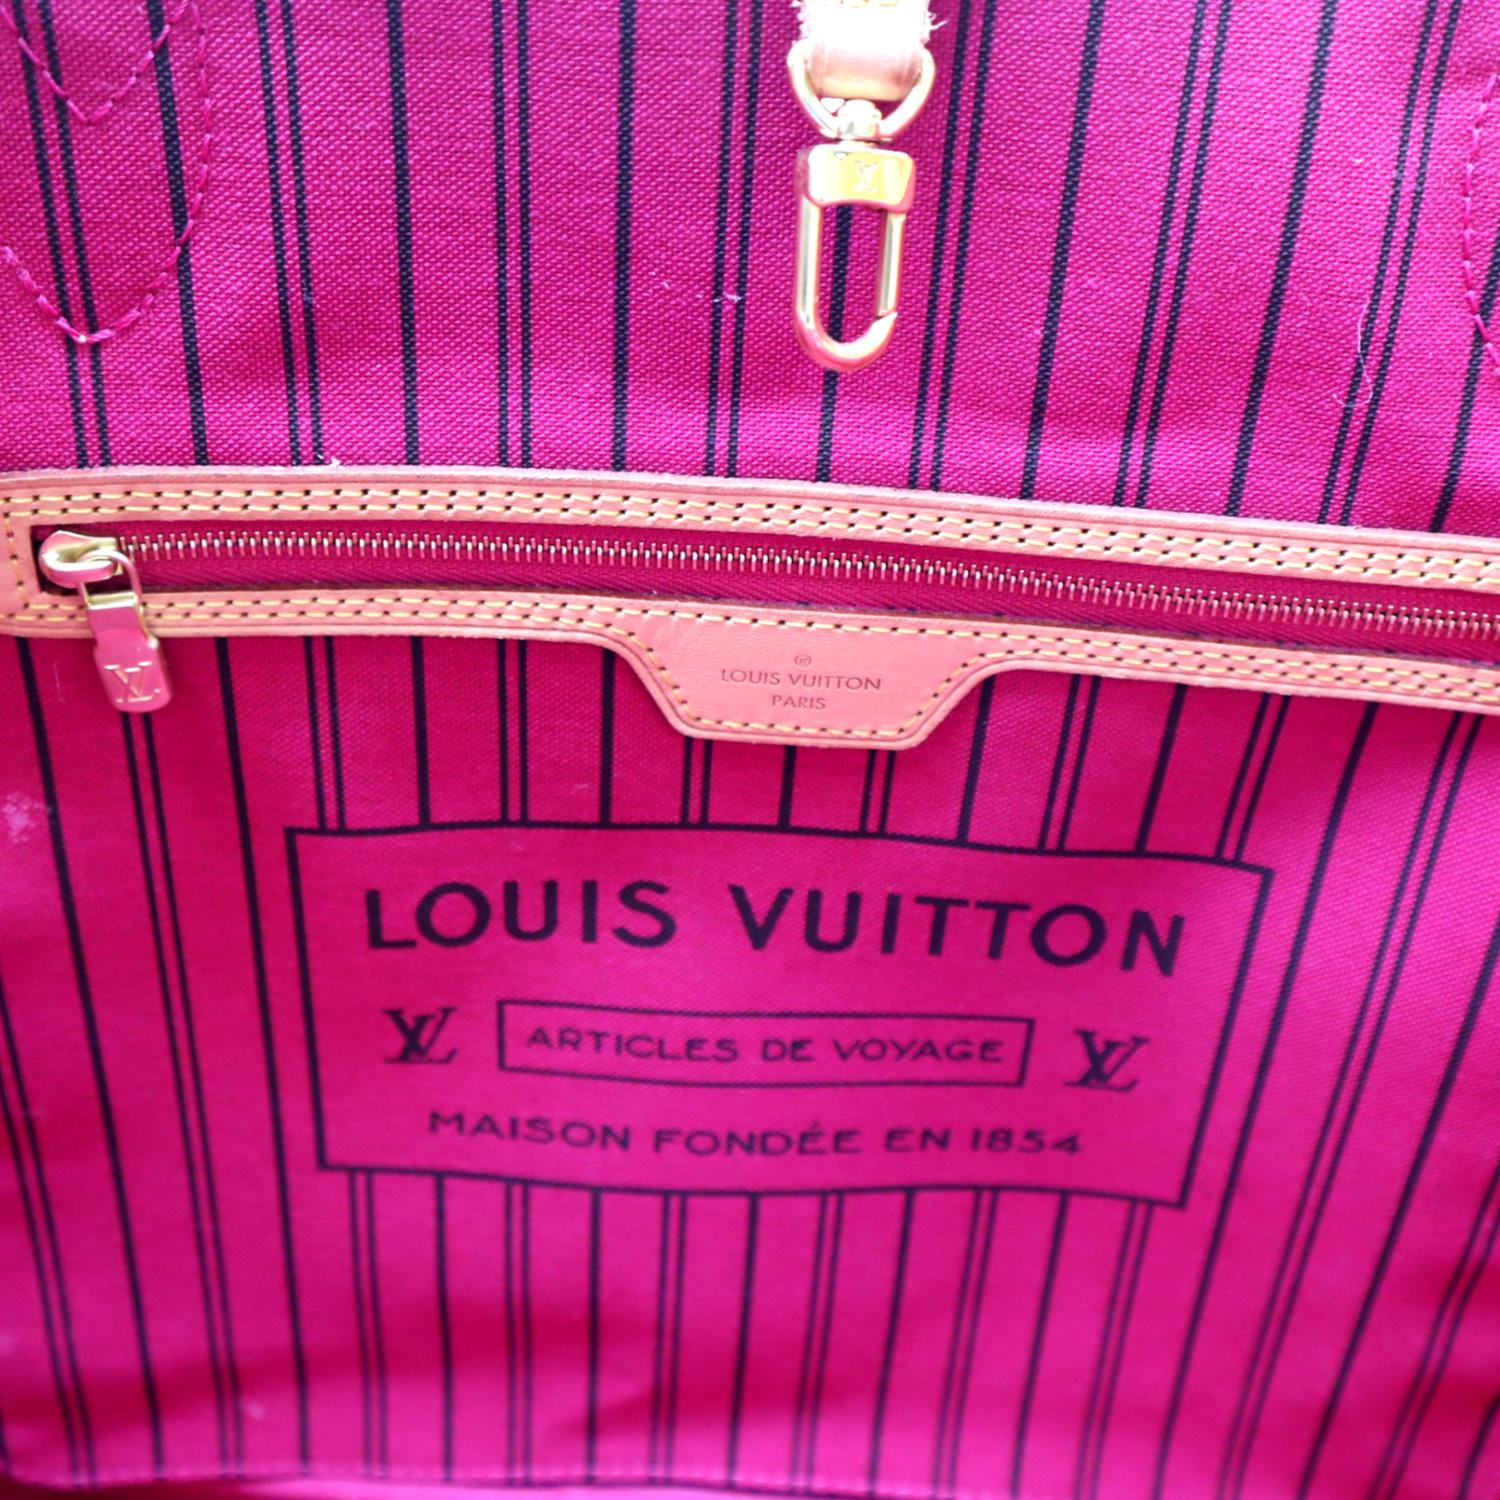 2015 Louis Vuitton Neverfull with pink inside! Love this bag & how